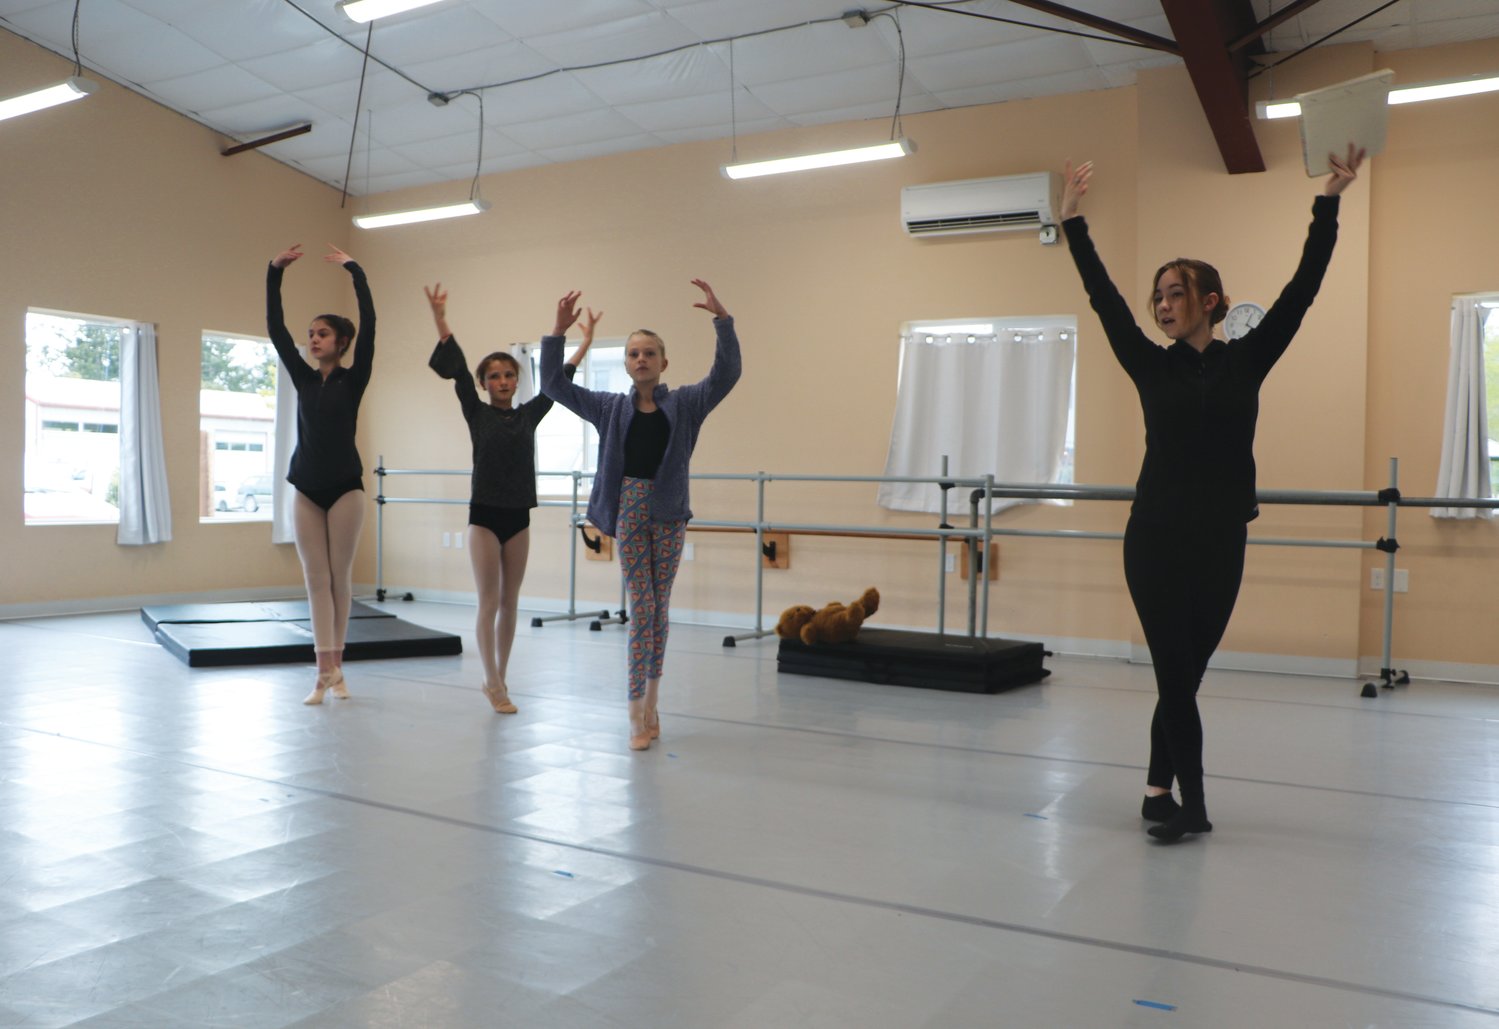 From Left: Cadence Hartland, 15, Molly Yanoff-Odell, 11, Cricket Douglas, 11, and Instructor Anna Tallarico in rehearsal for their spring performance of “Peter Pan.”